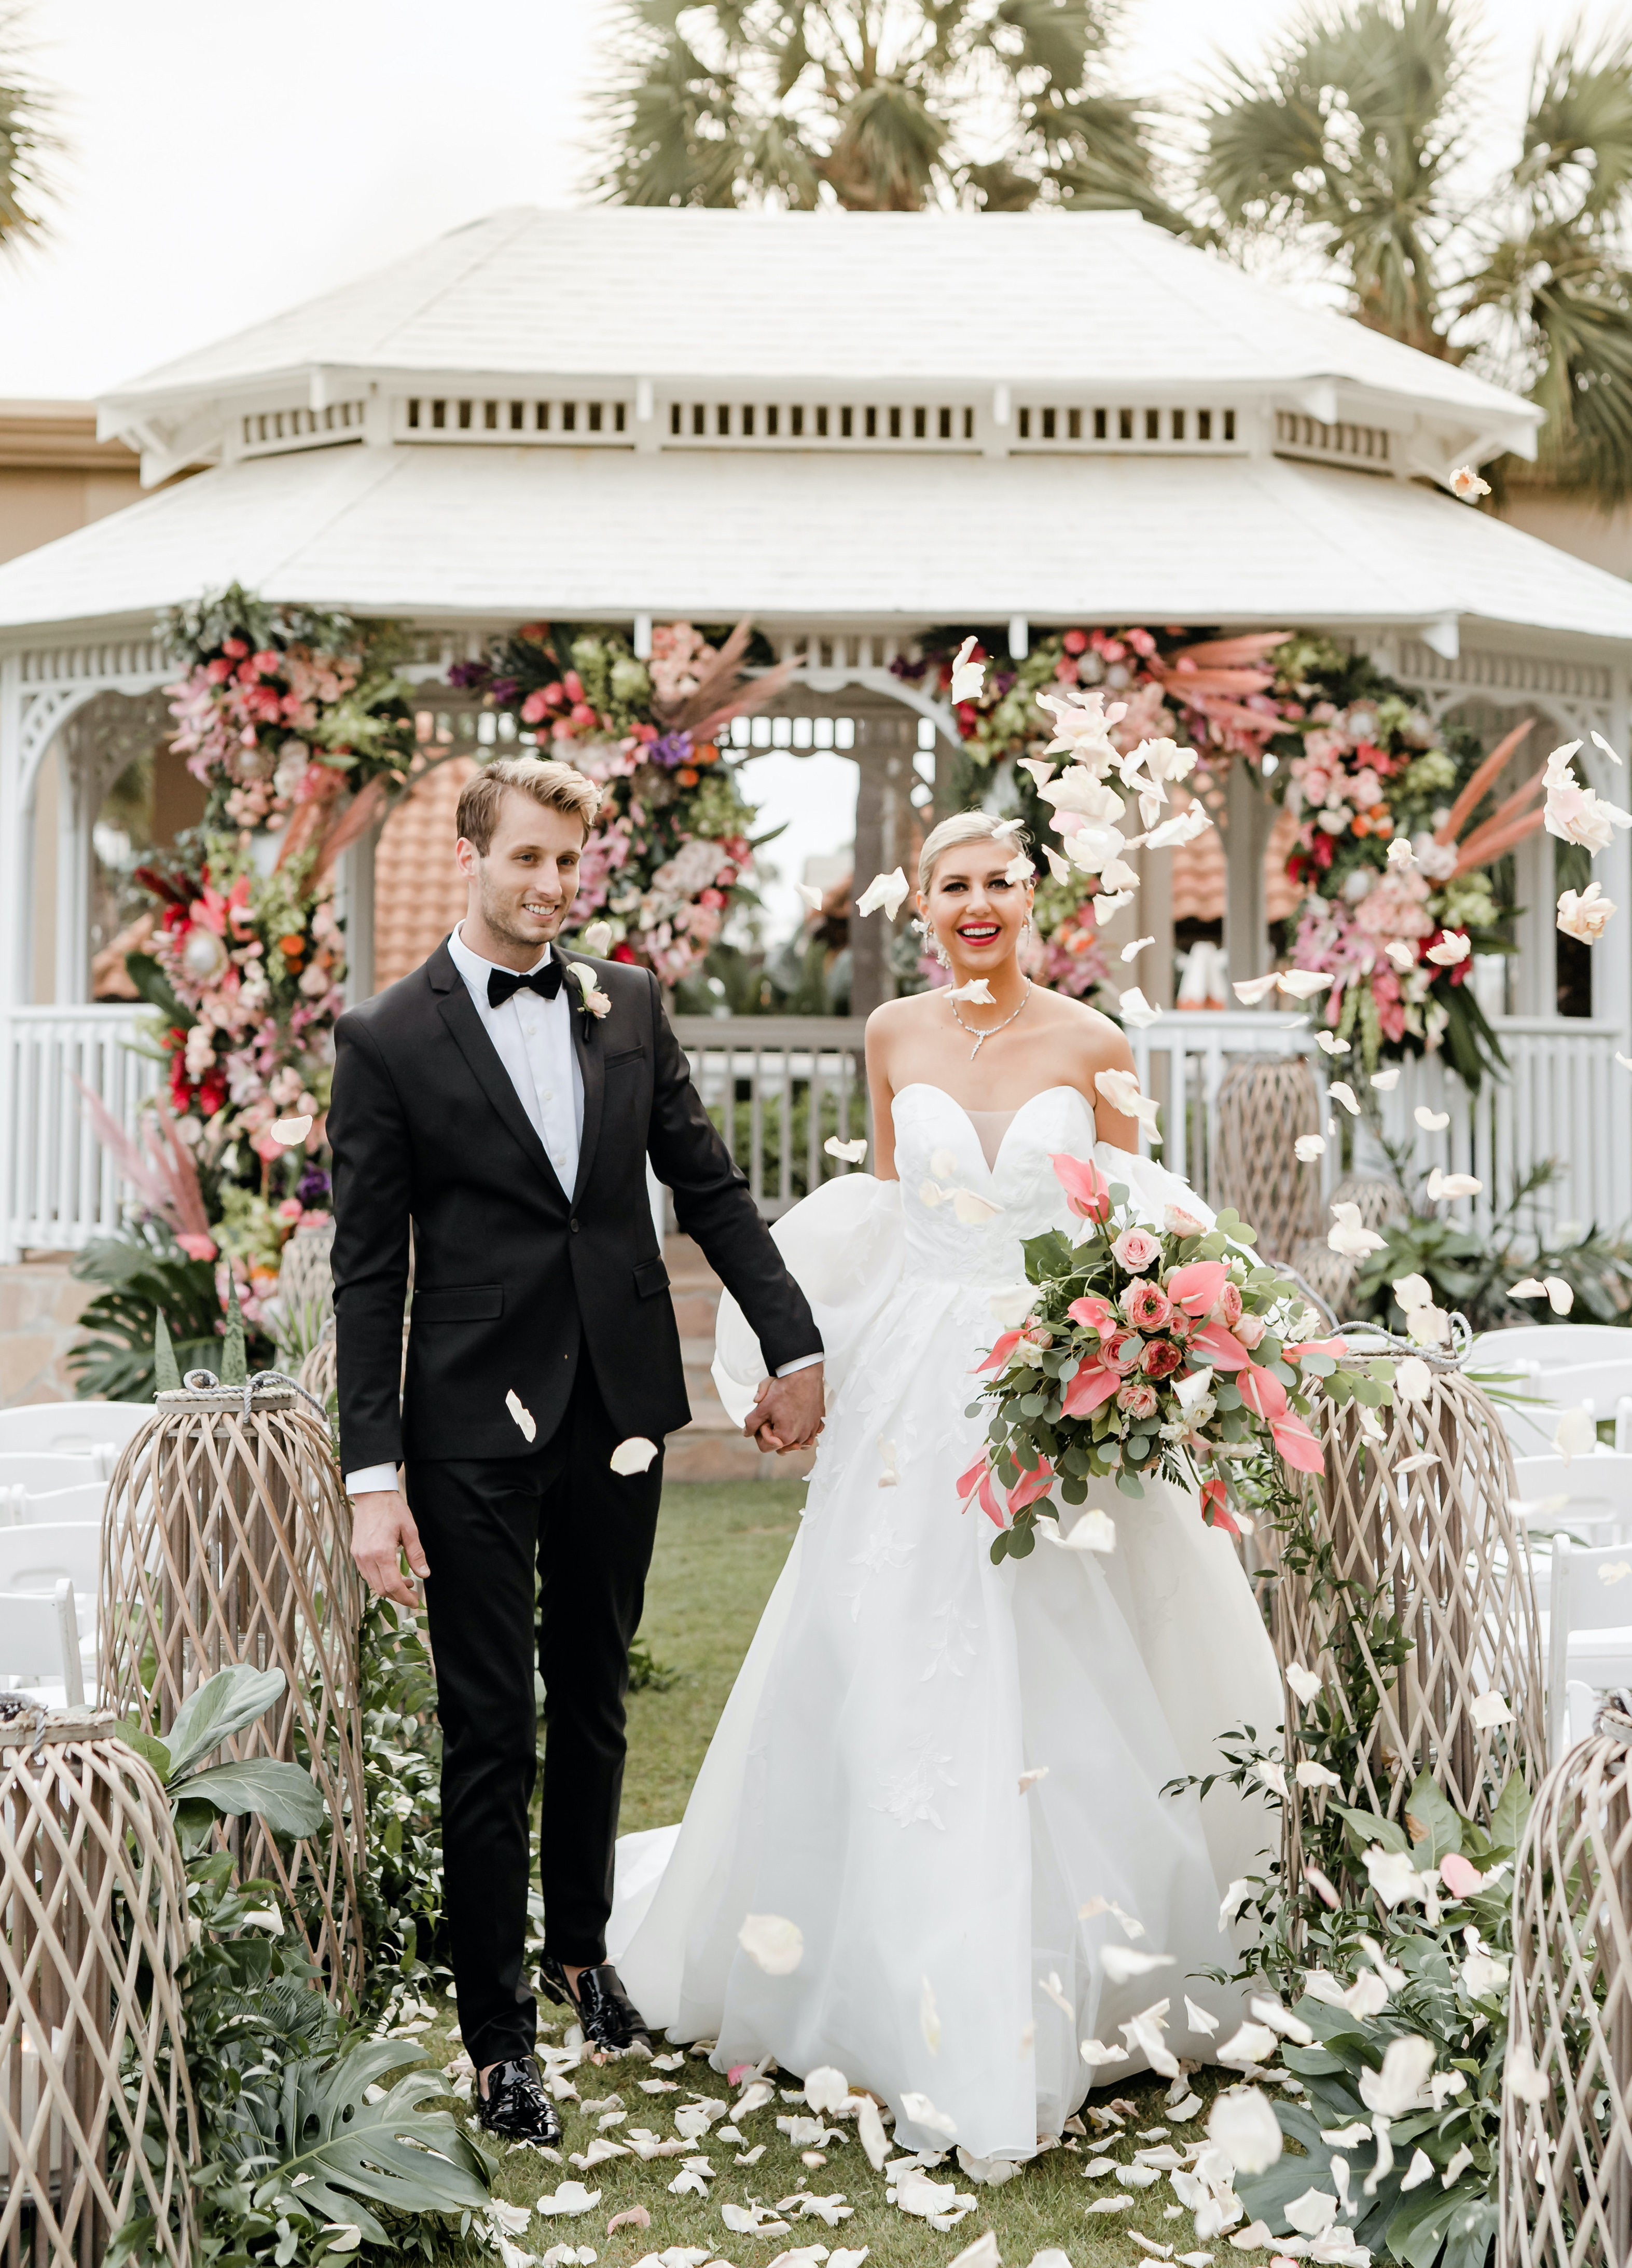 A bride and groom walk down the aisle while rose petals are being thrown in the air around them during a tropical luxe beachfront wedding editorial.